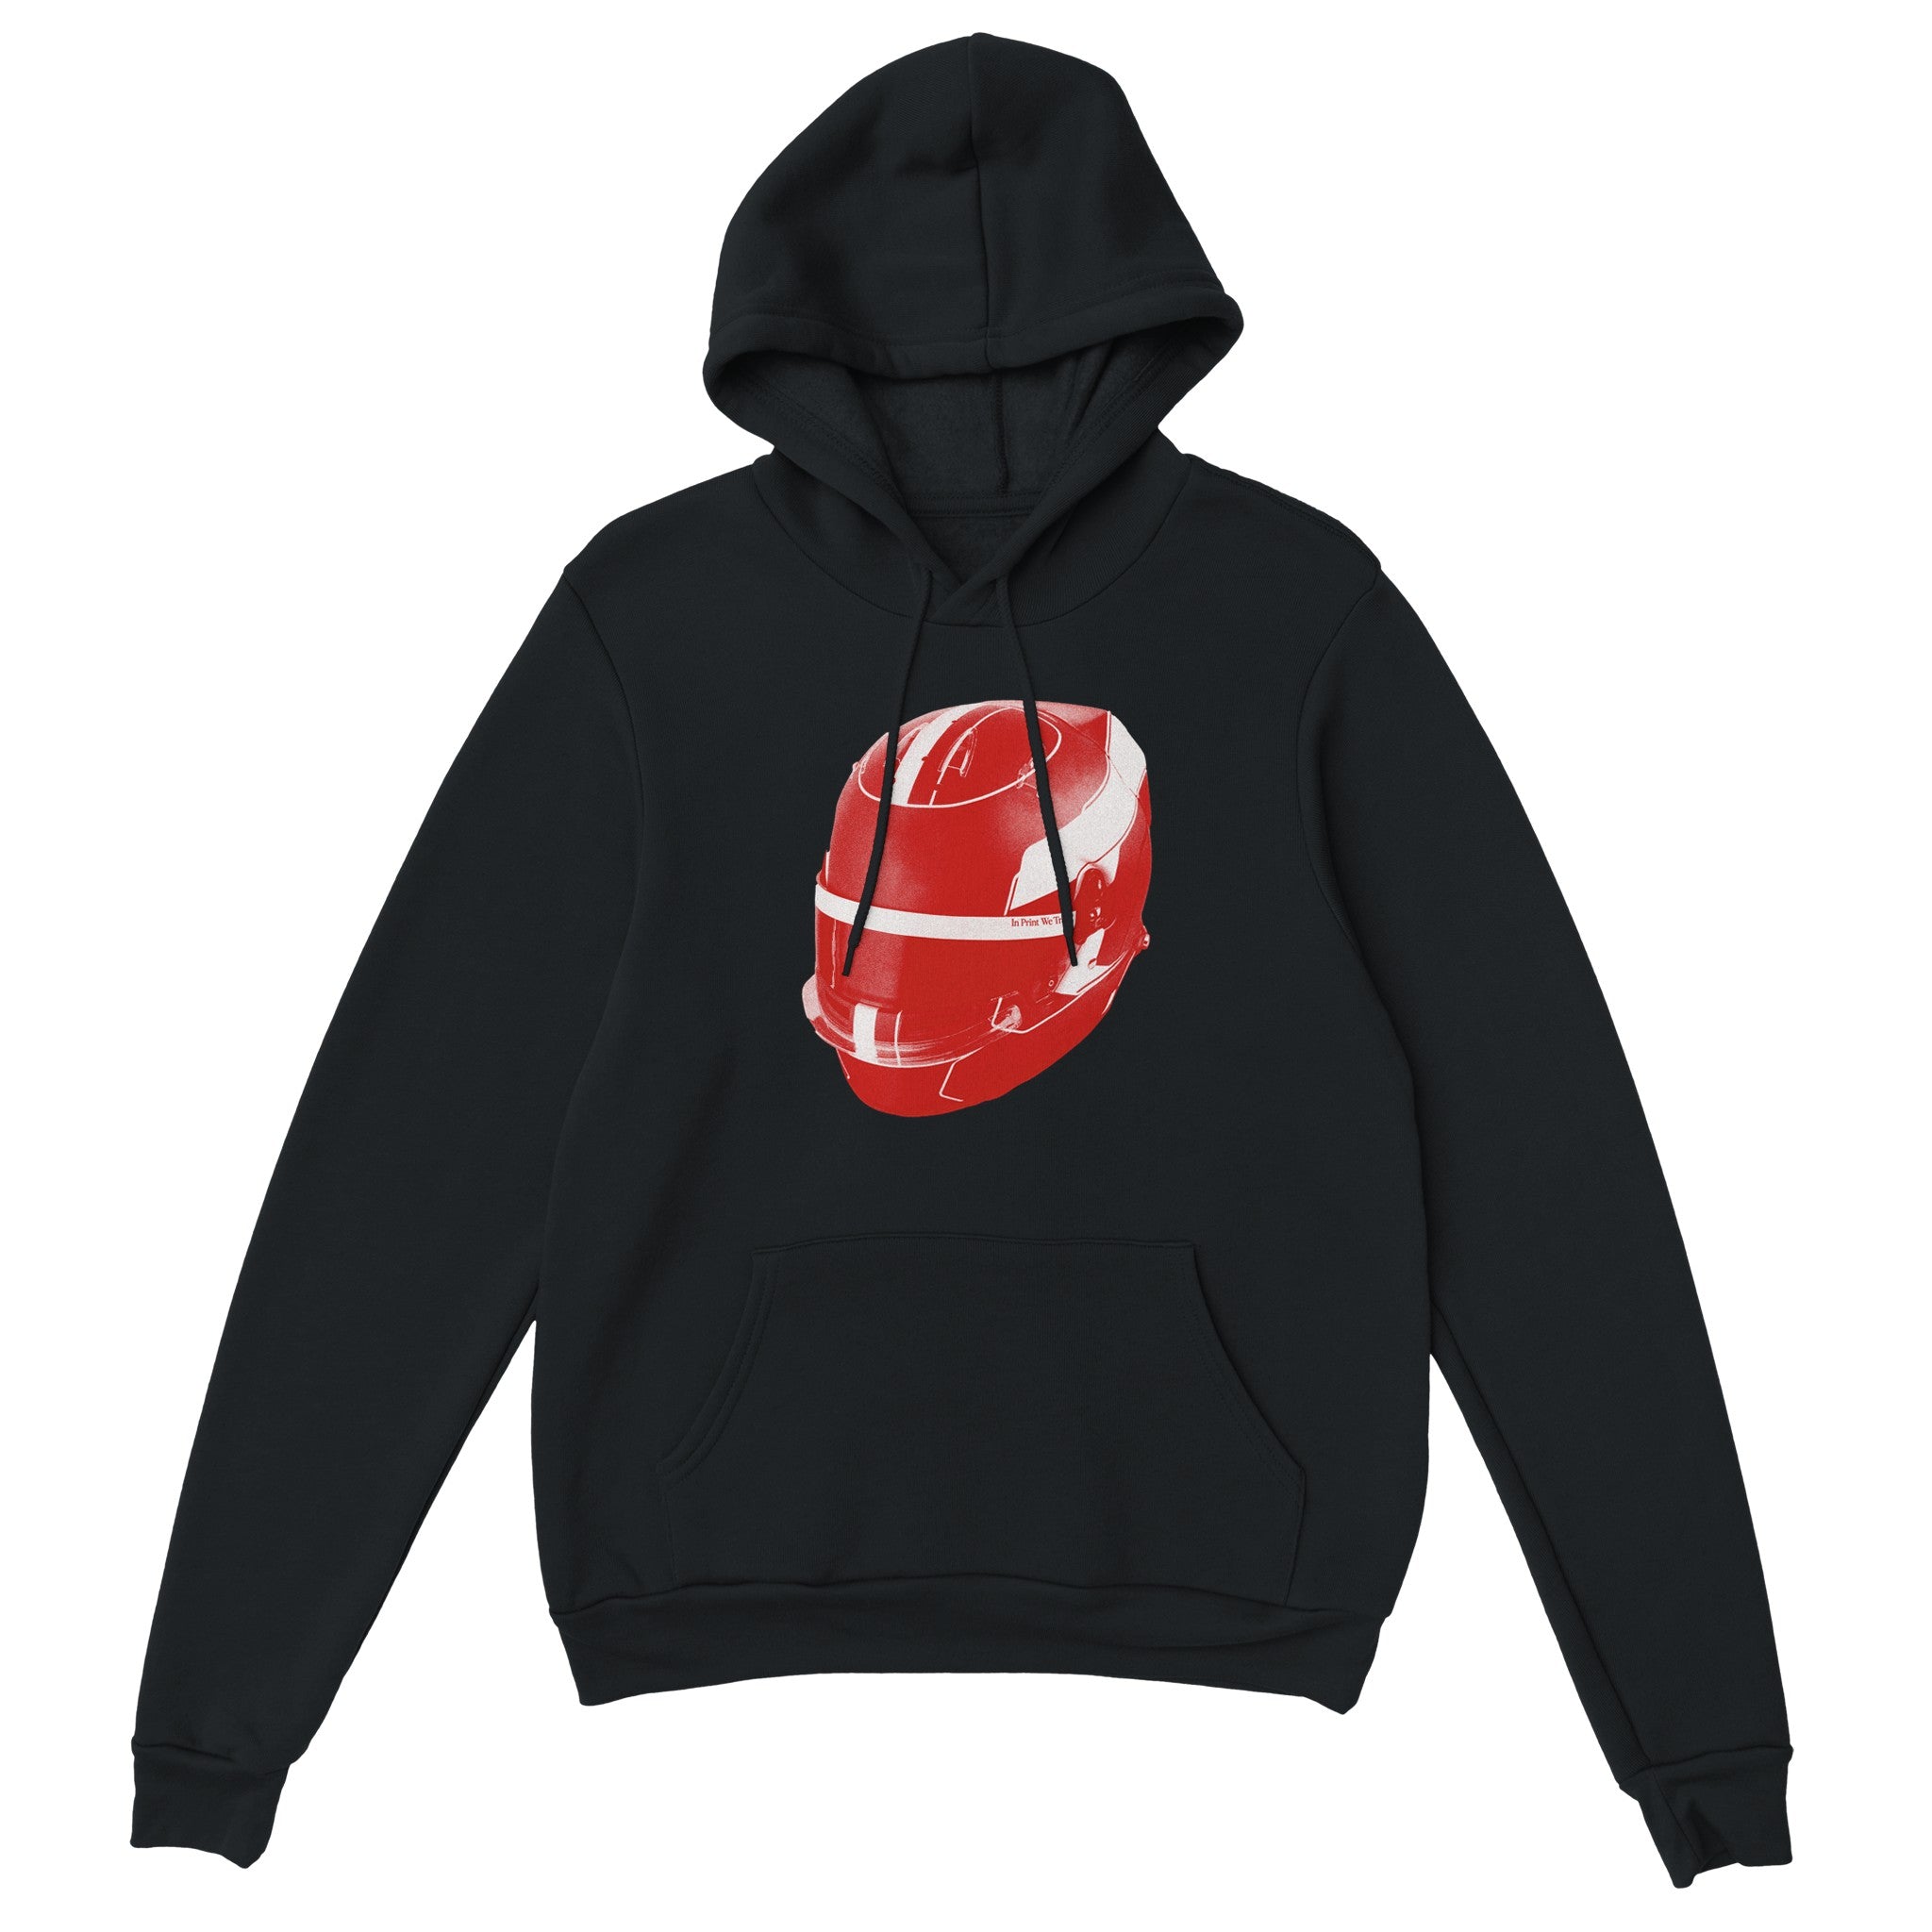 'Safety First' hoodie - In Print We Trust